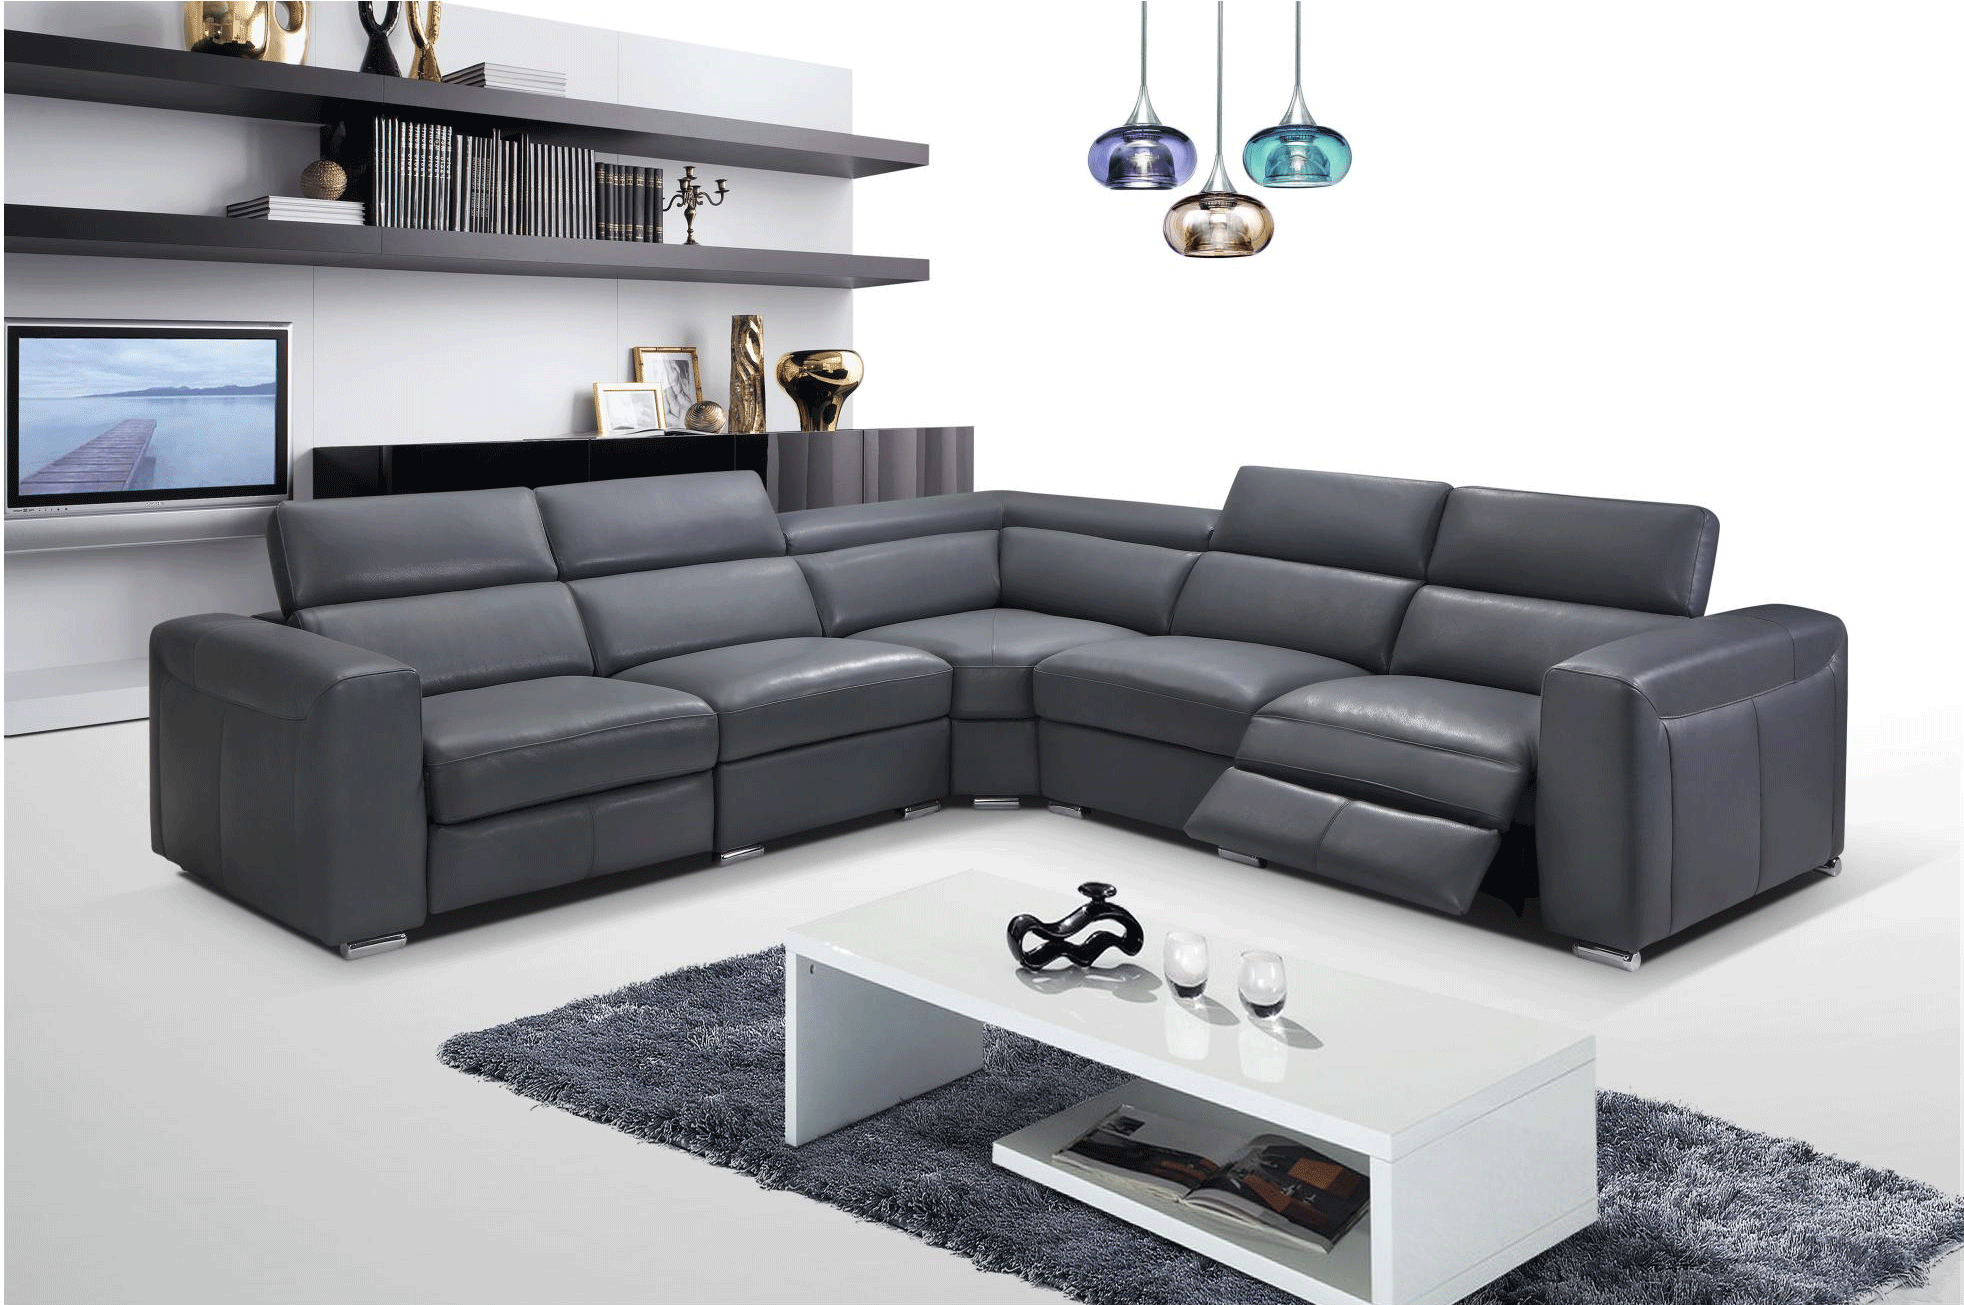 Brands ALF Capri Coffee Tables, Italy 2919 Sectional w/ recliners